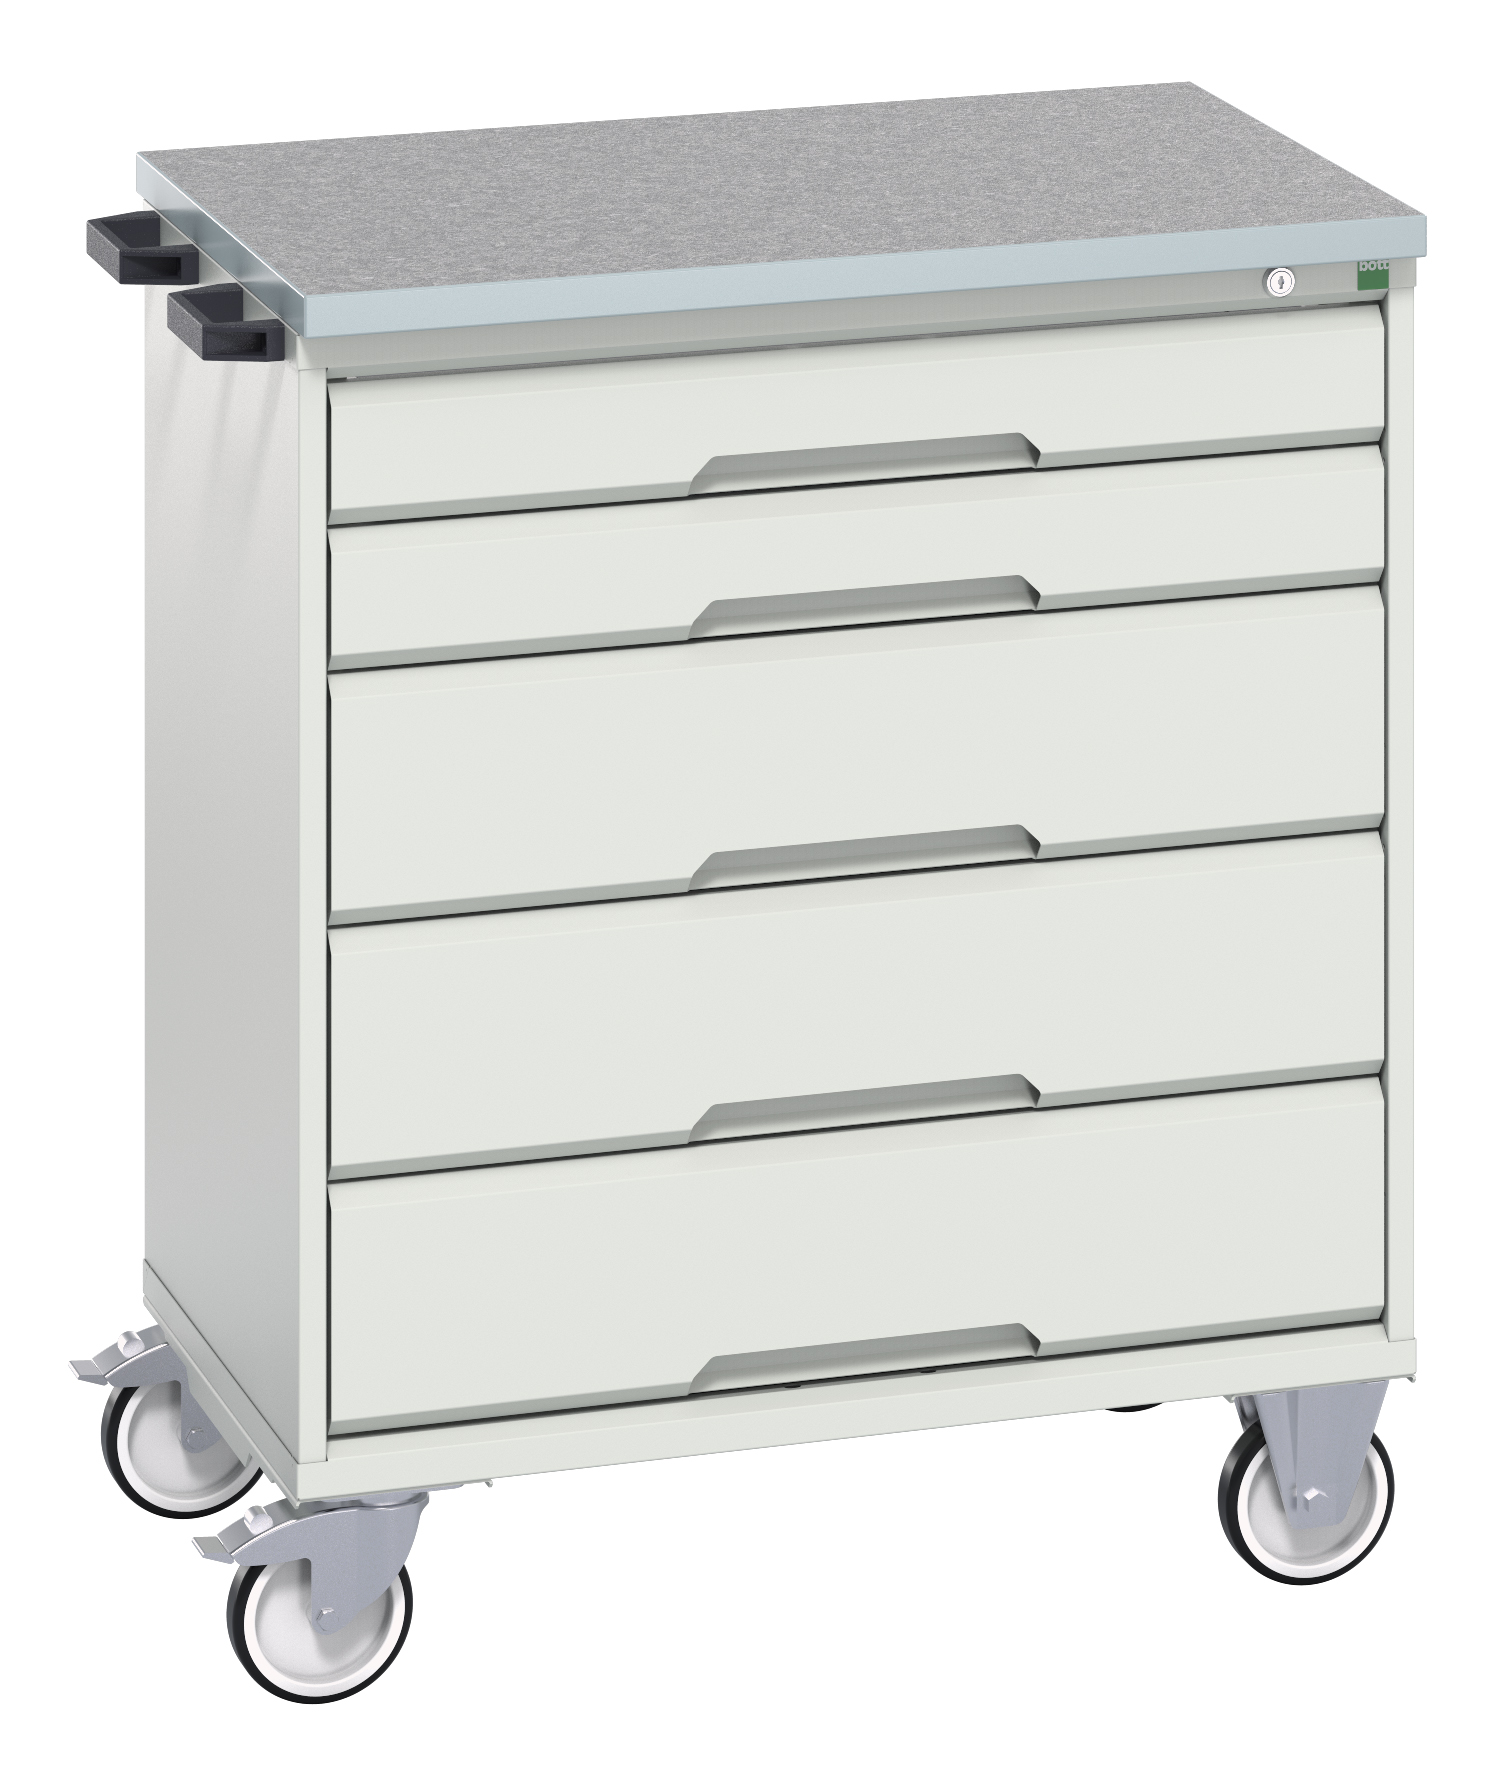 Bott Verso Mobile Drawer Cabinet With 5 Drawers & Lino Top - 16927000.16